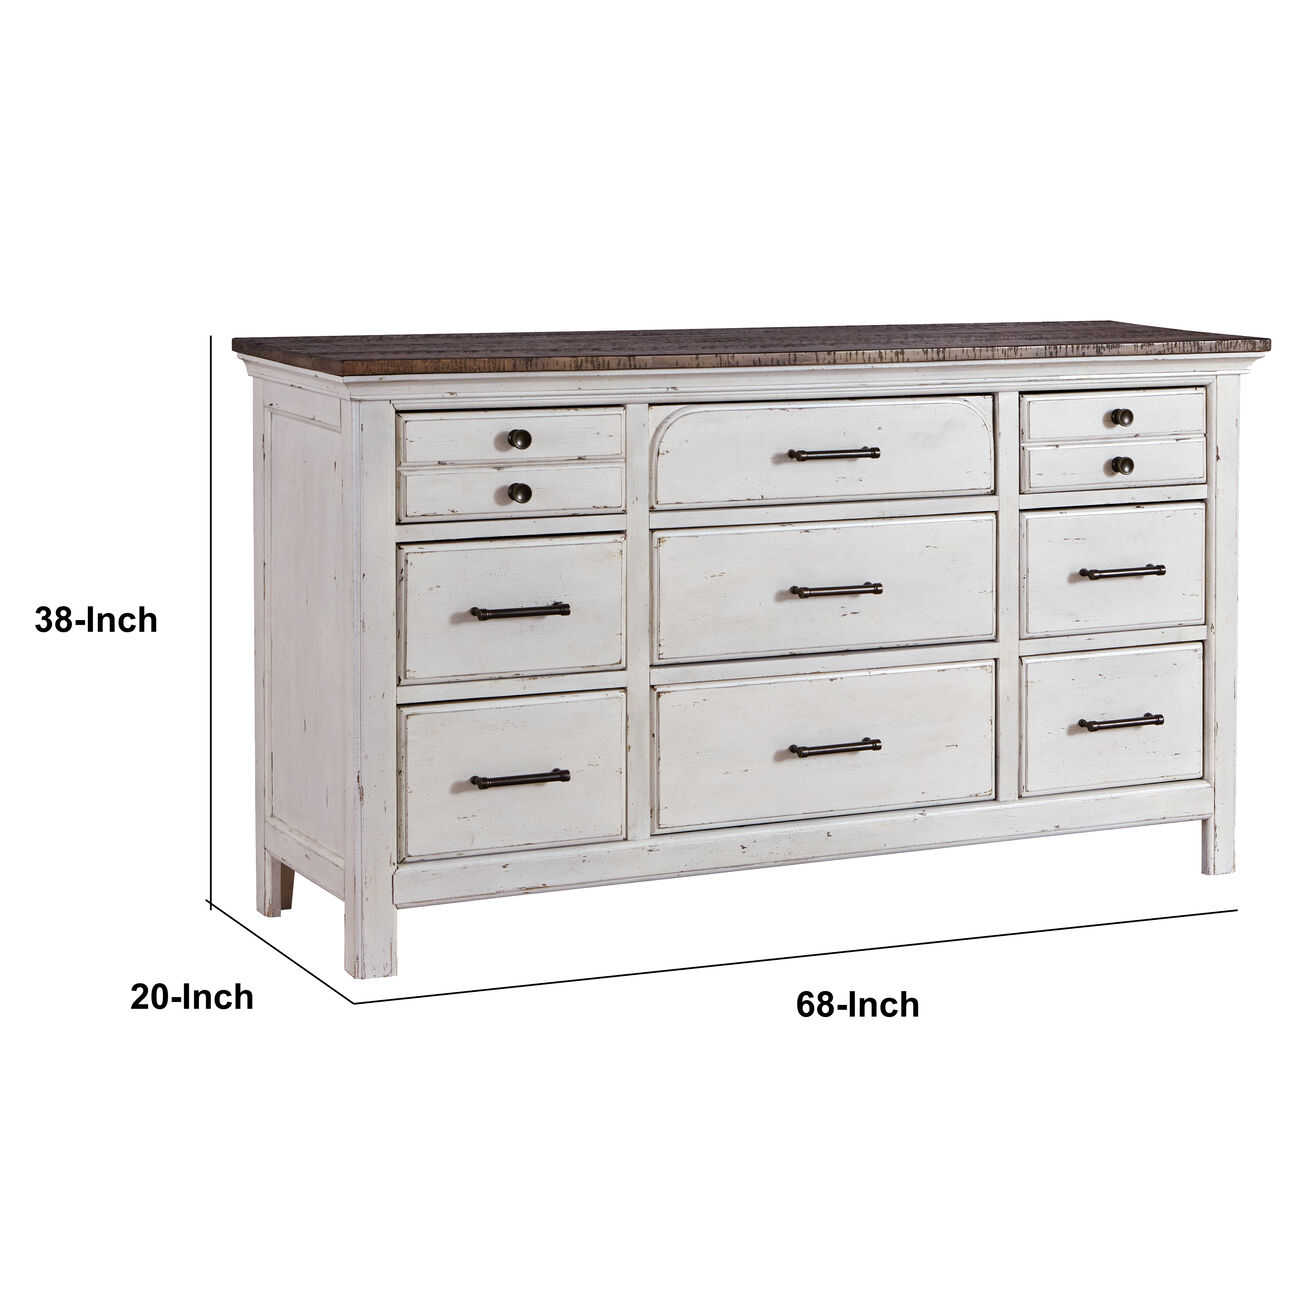 Wooden Dresser with Planked Top and Nine Drawers, White and Brown